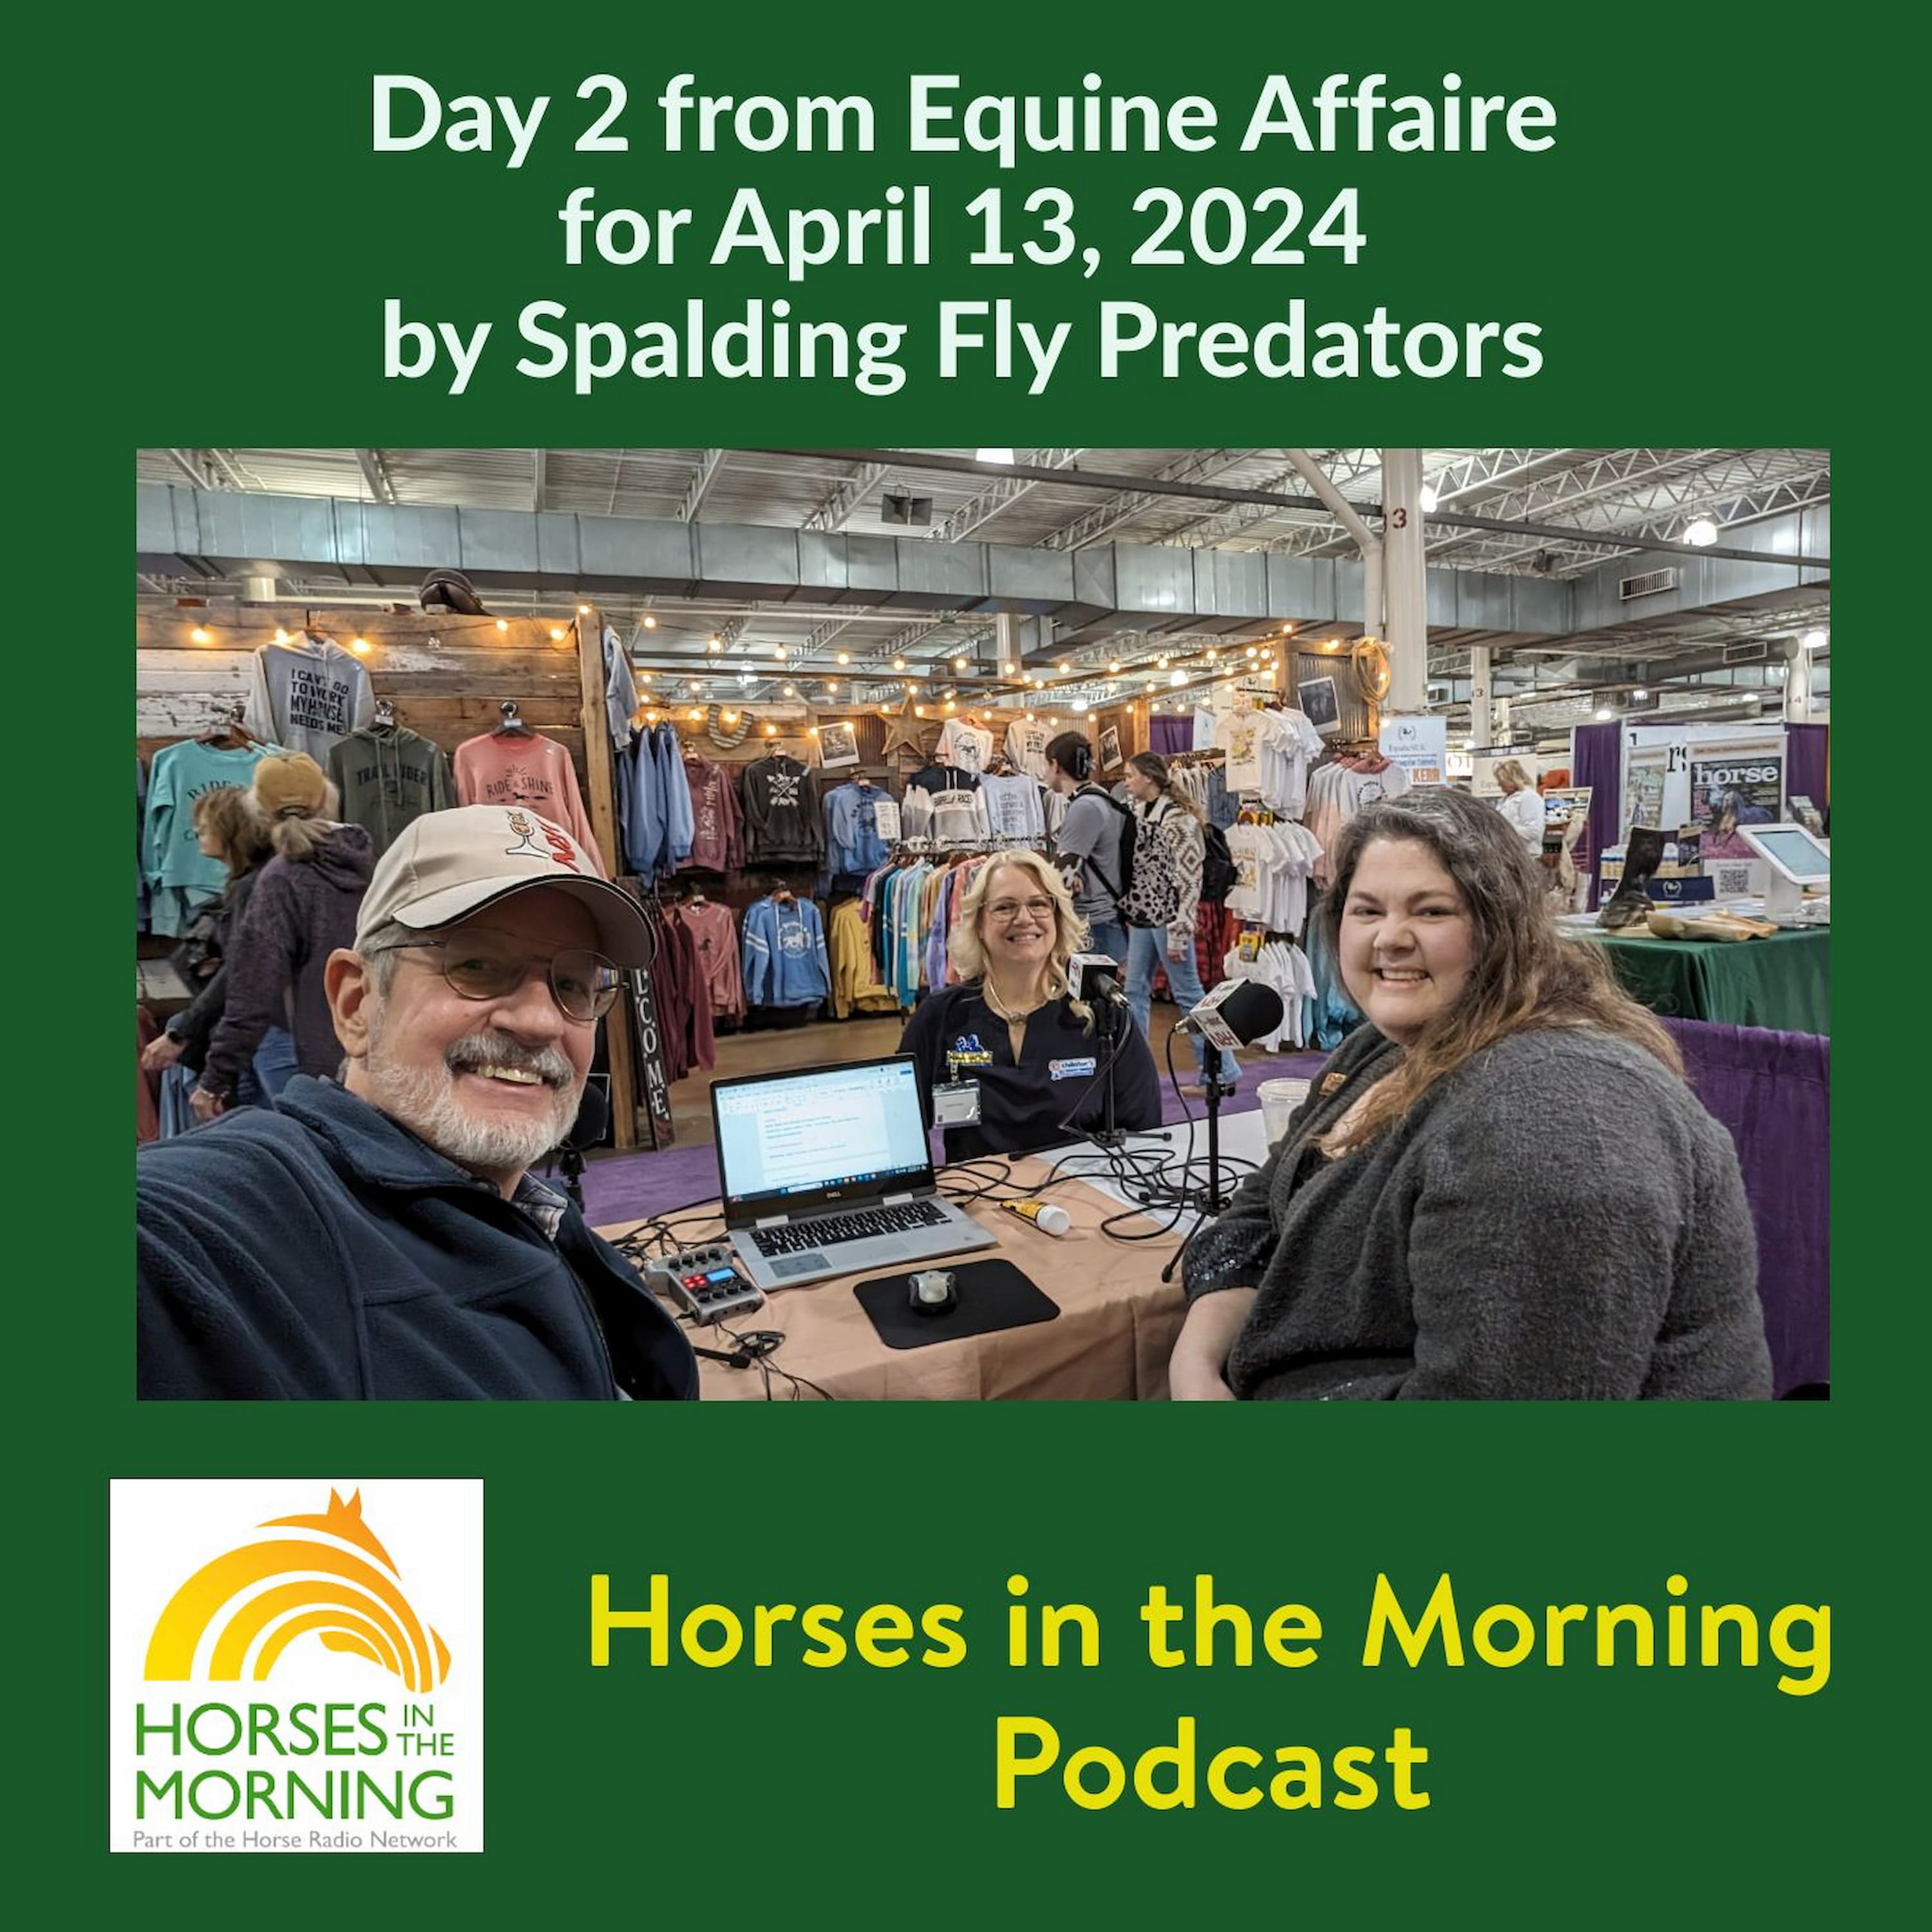 Day 2 from Equine Affaire for April 13, 2024 by Spalding Fly Predators